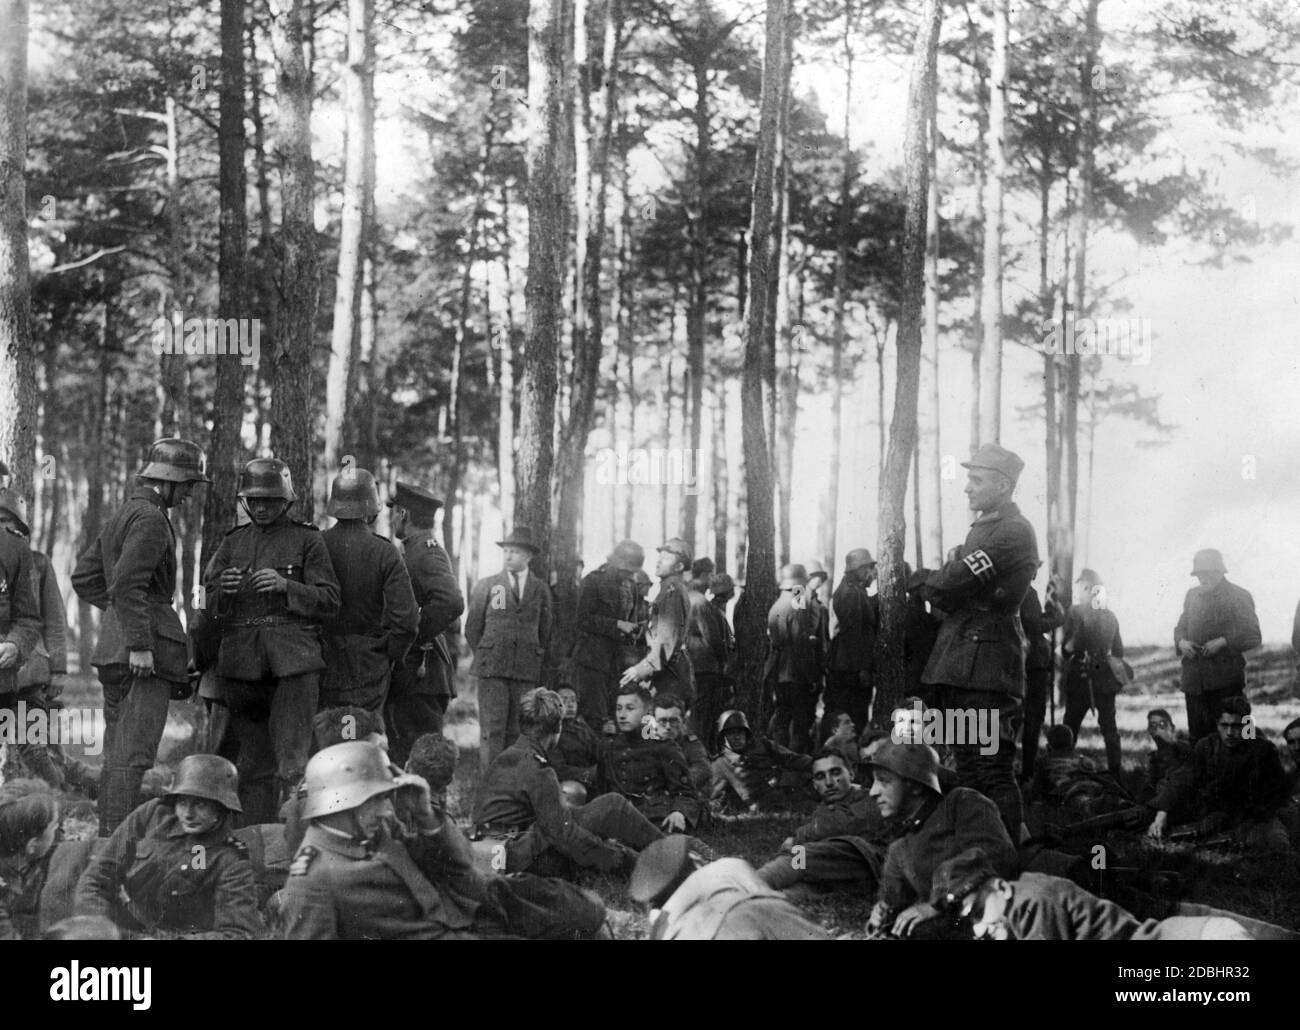 Field exercise of the Freikorps with Gerhard Rossbach in the surroundings of Munich. Standing on the right and wearing a swastika armband: Gerhard Rossbach. The Freikorps took part in the Beer Hall Putsch in Munich in November 1923. Stock Photo